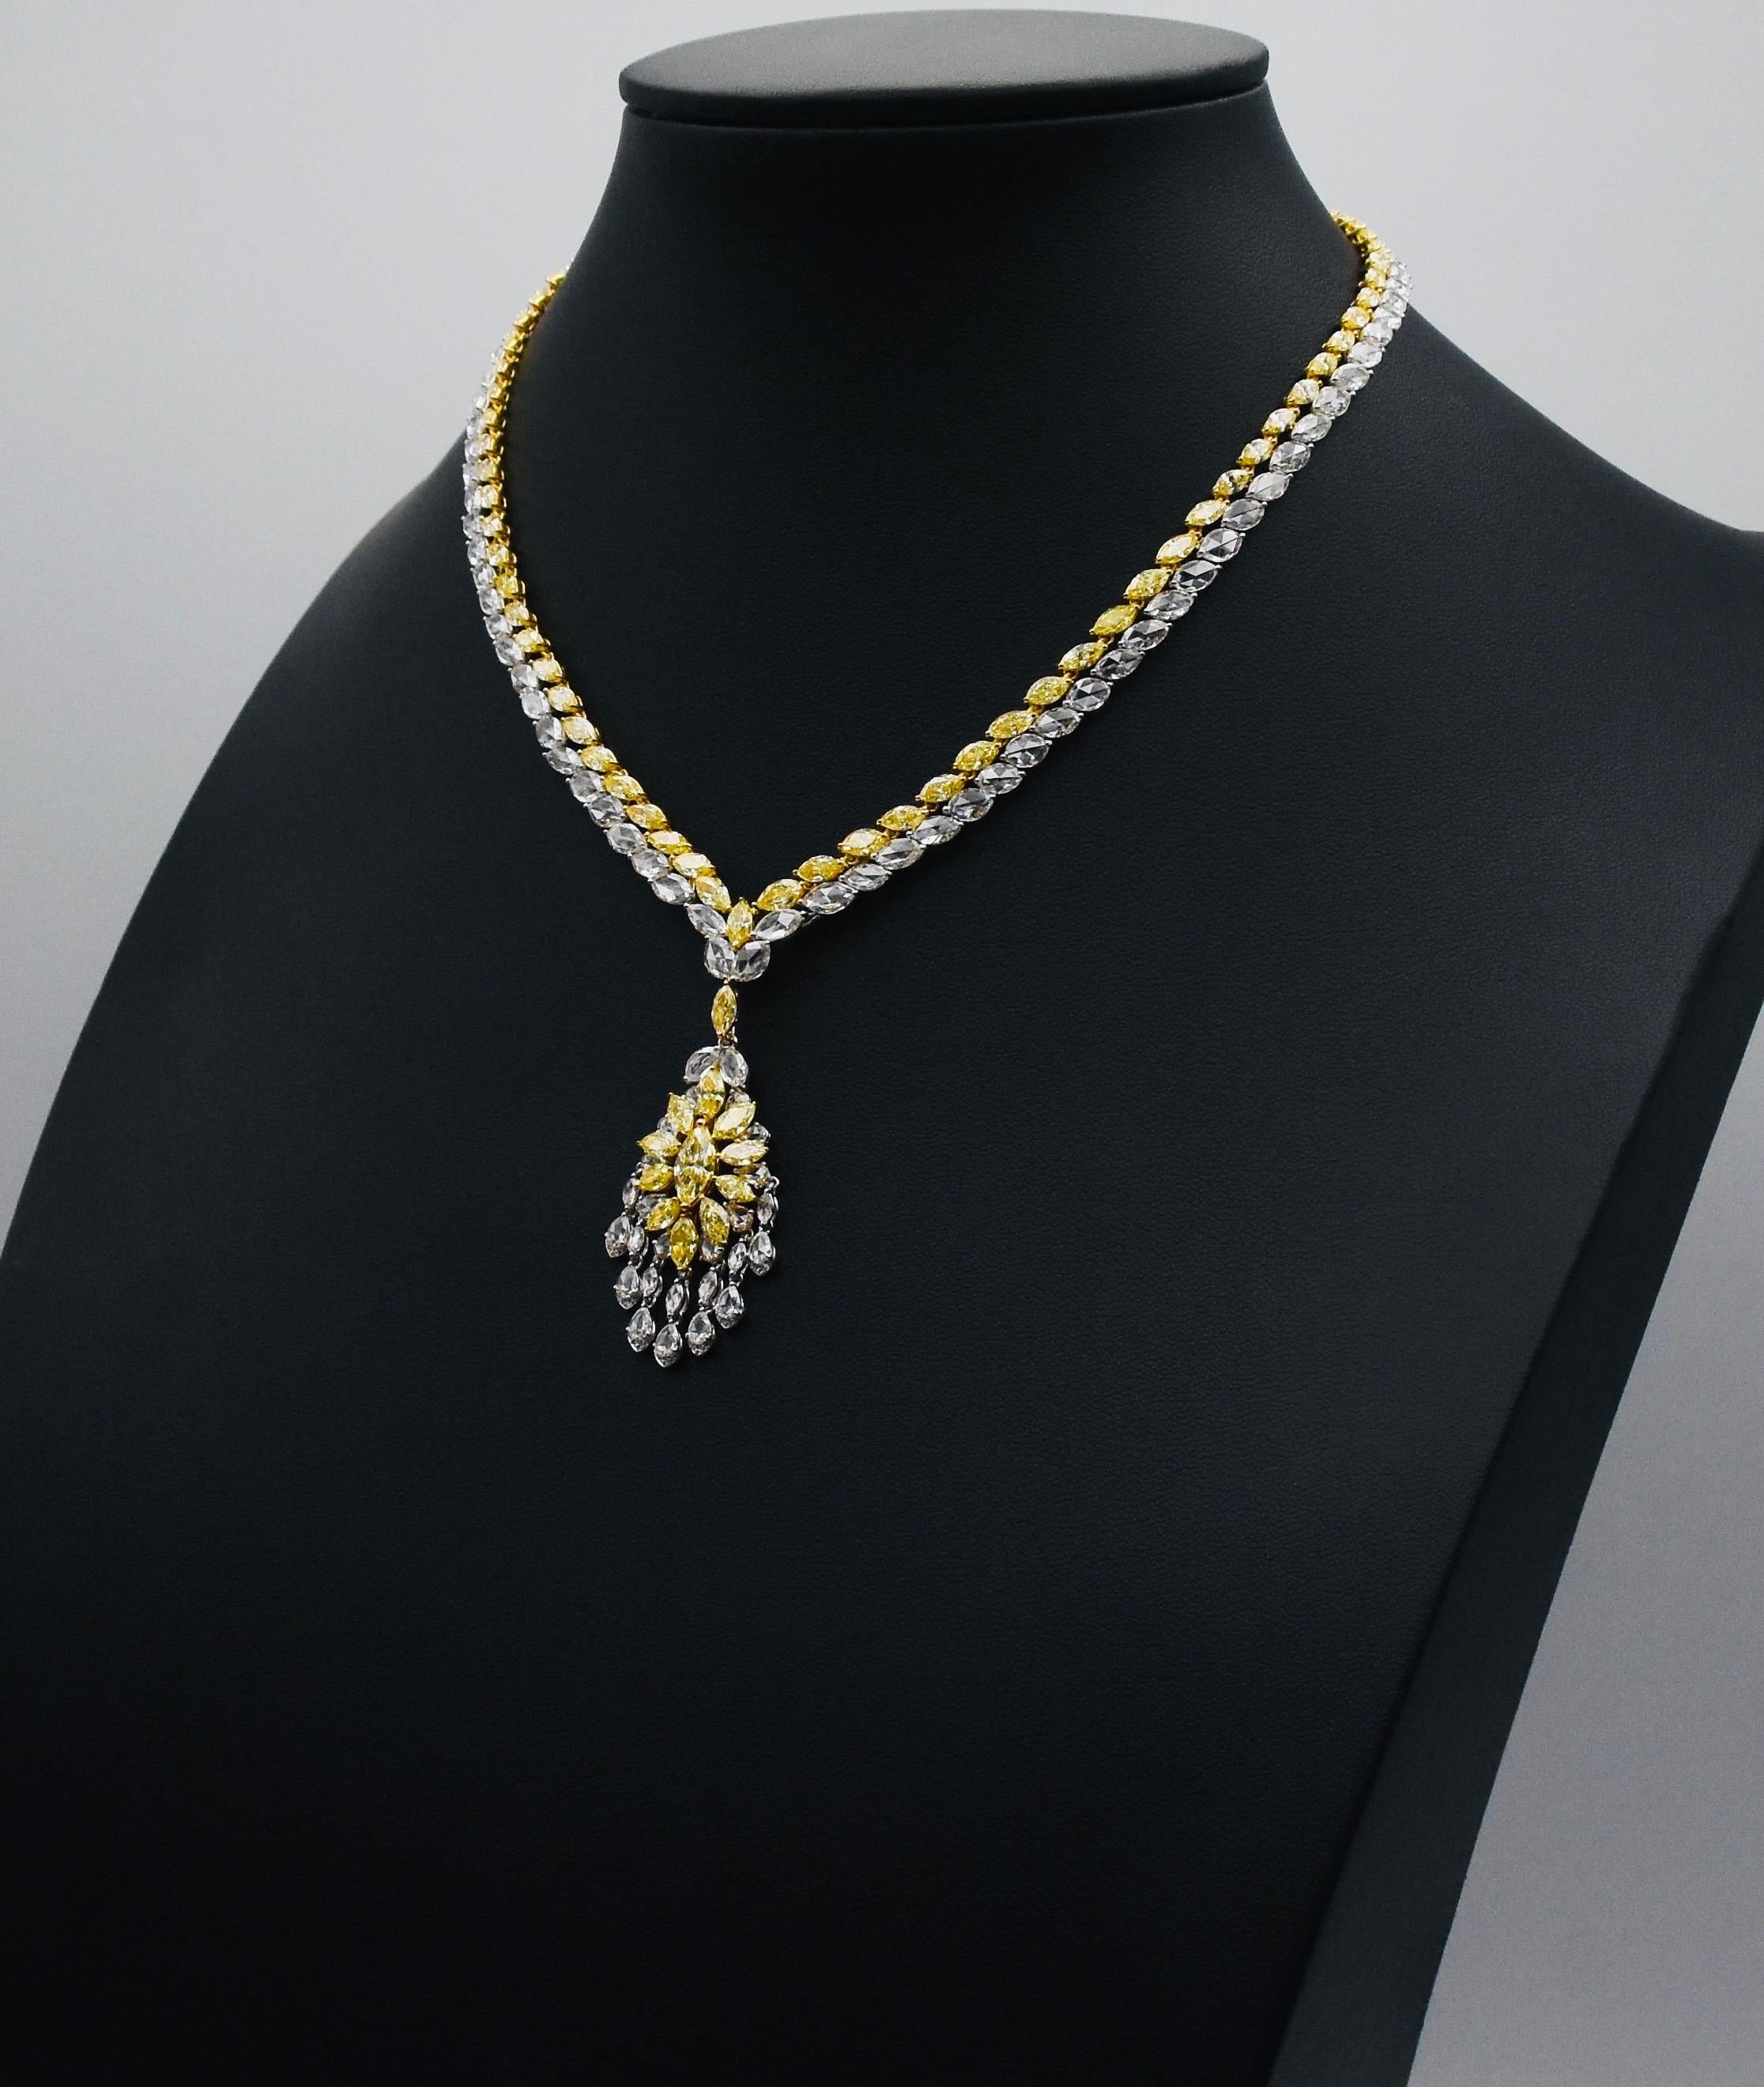 From the vault at Emilio Jewelry located on New York's Fifth Avenue,
featuring a total weight of approximately 20.73 Carats, this meticulous hand made necklace is sure to be a show stopper! Please inquire for details. 
Diamond Weight: 20.73